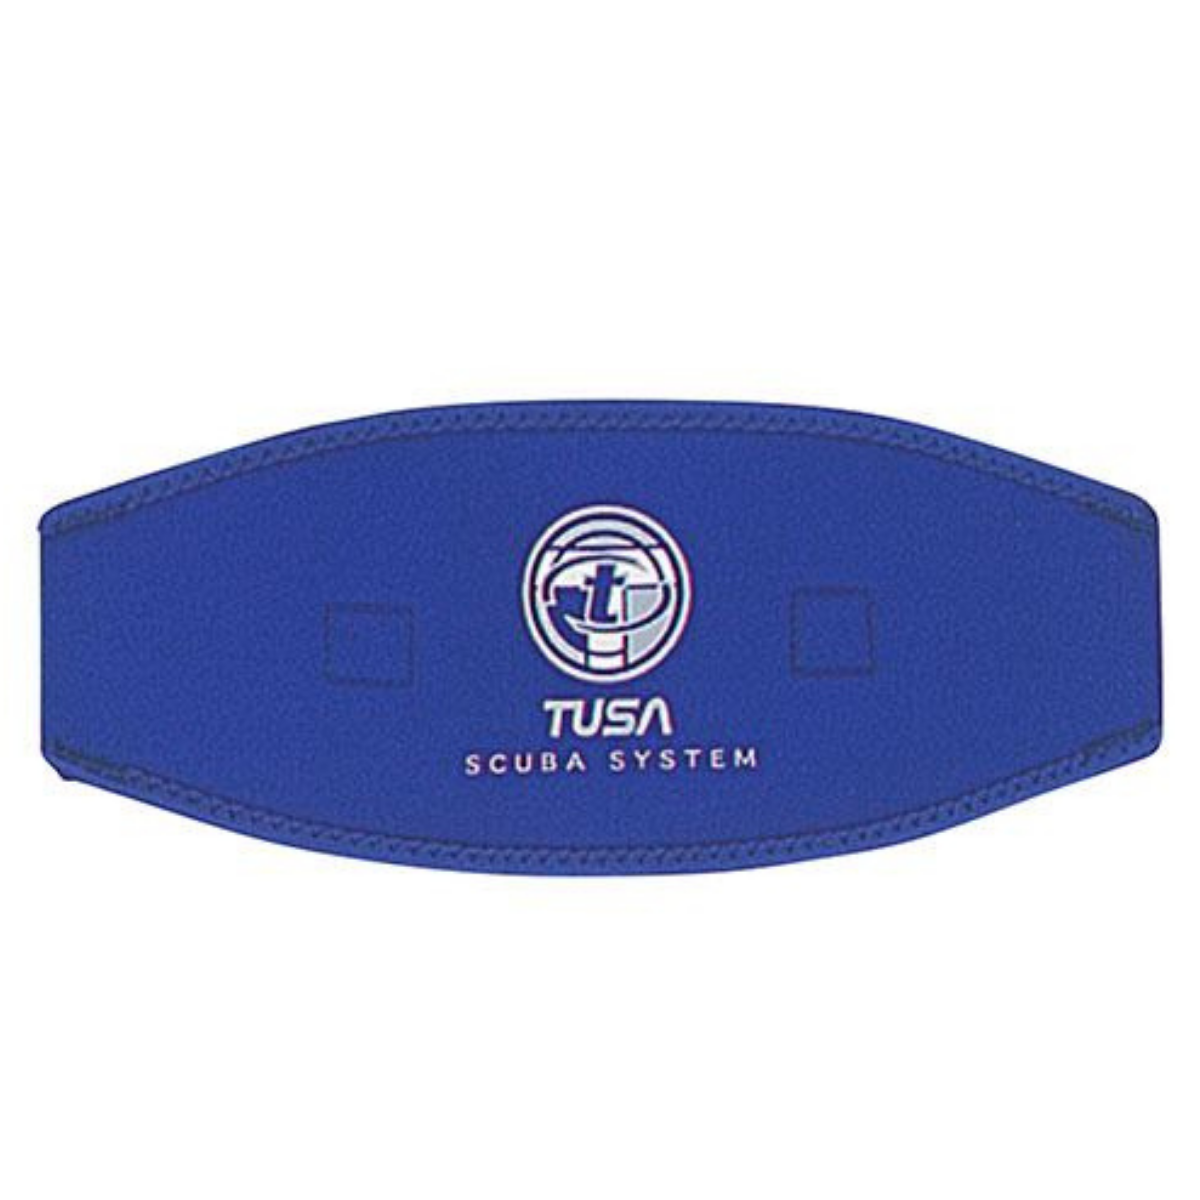 Mask strap cover